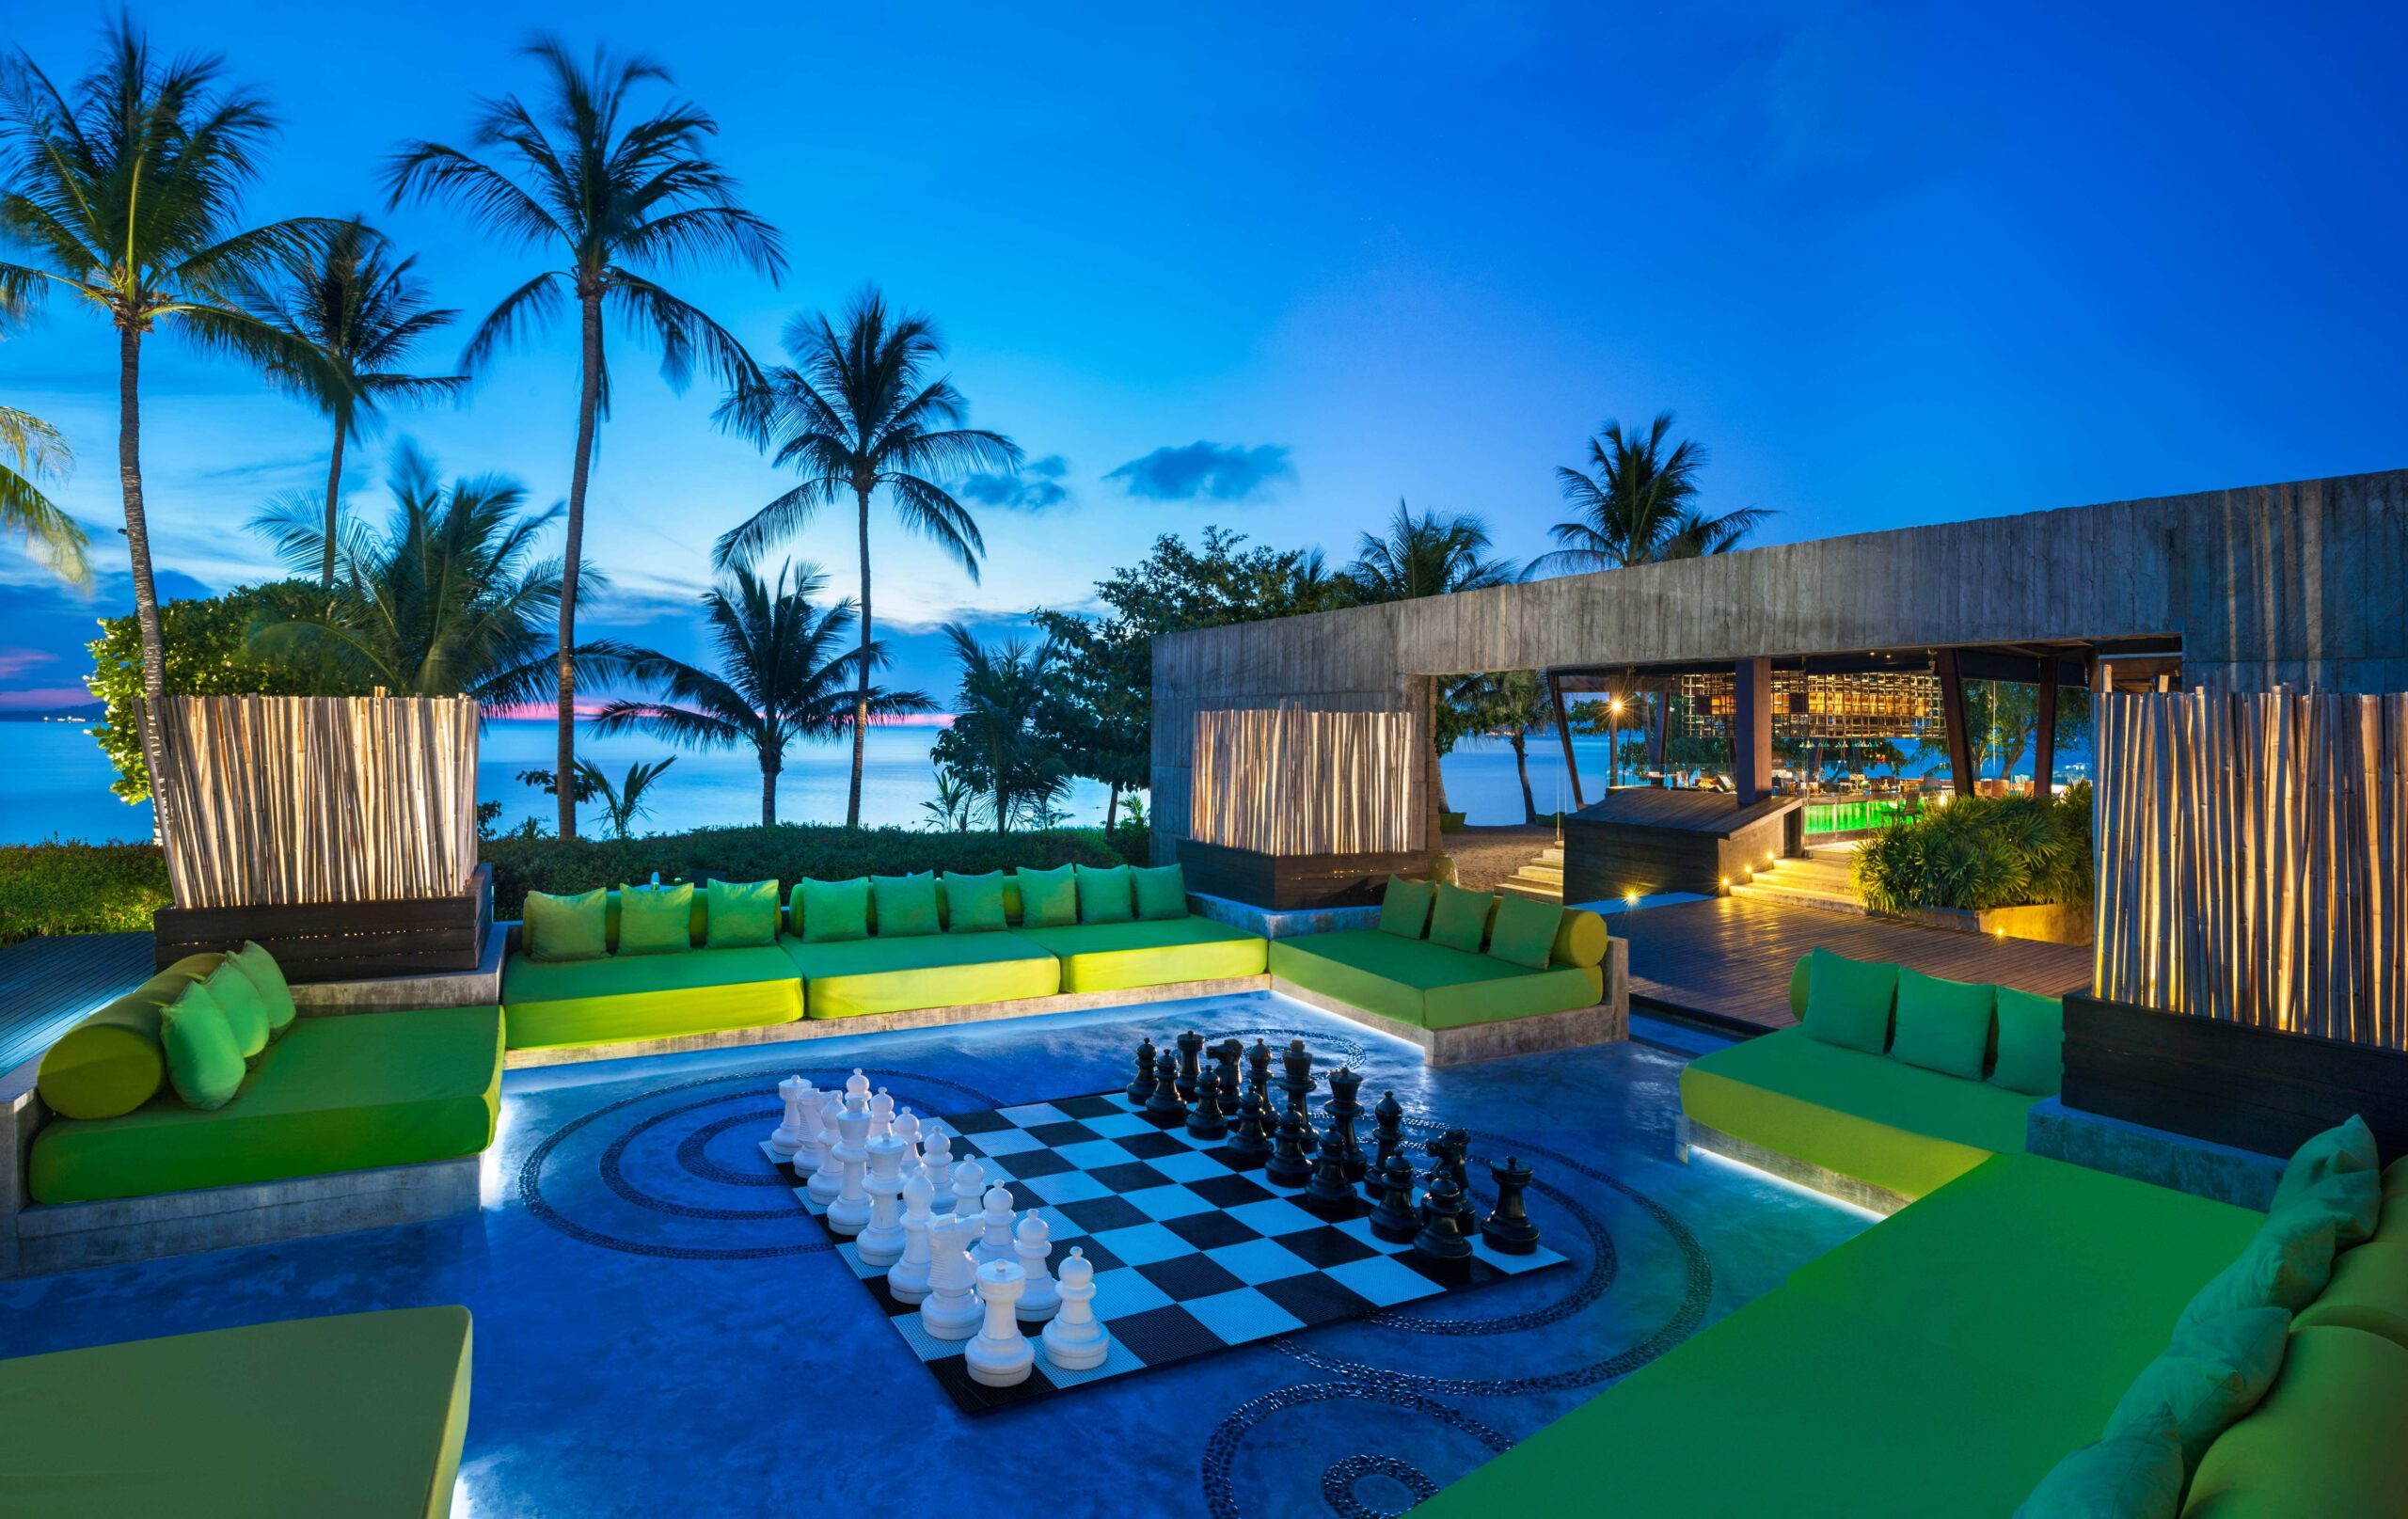 The Chess Samui in Koh Samui: Find Hotel Reviews, Rooms, and